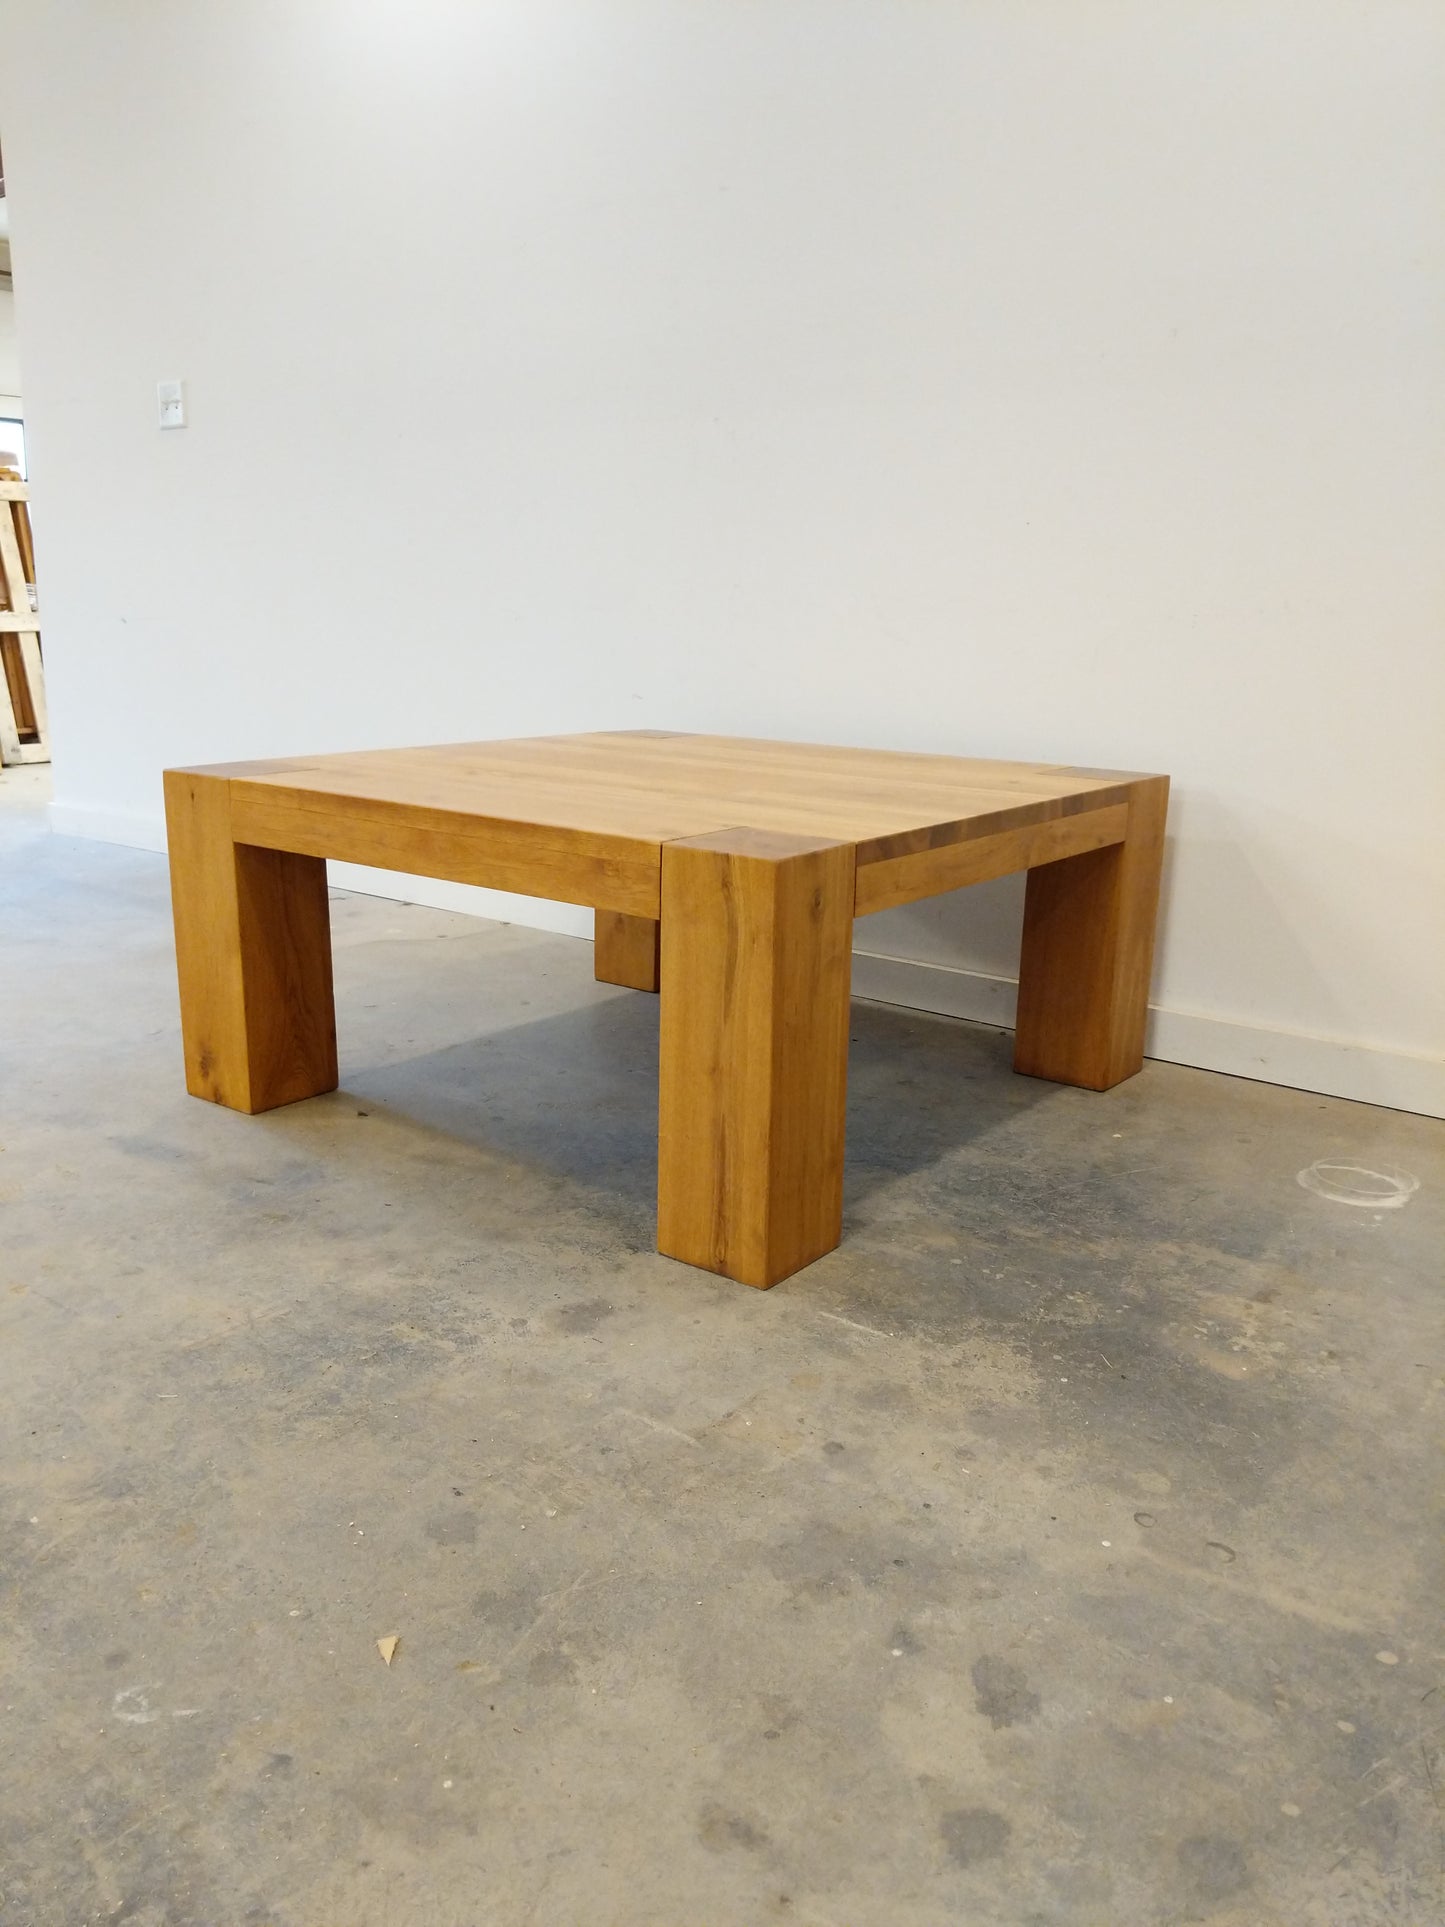 Contemporary European Cherry Wood Coffee Table